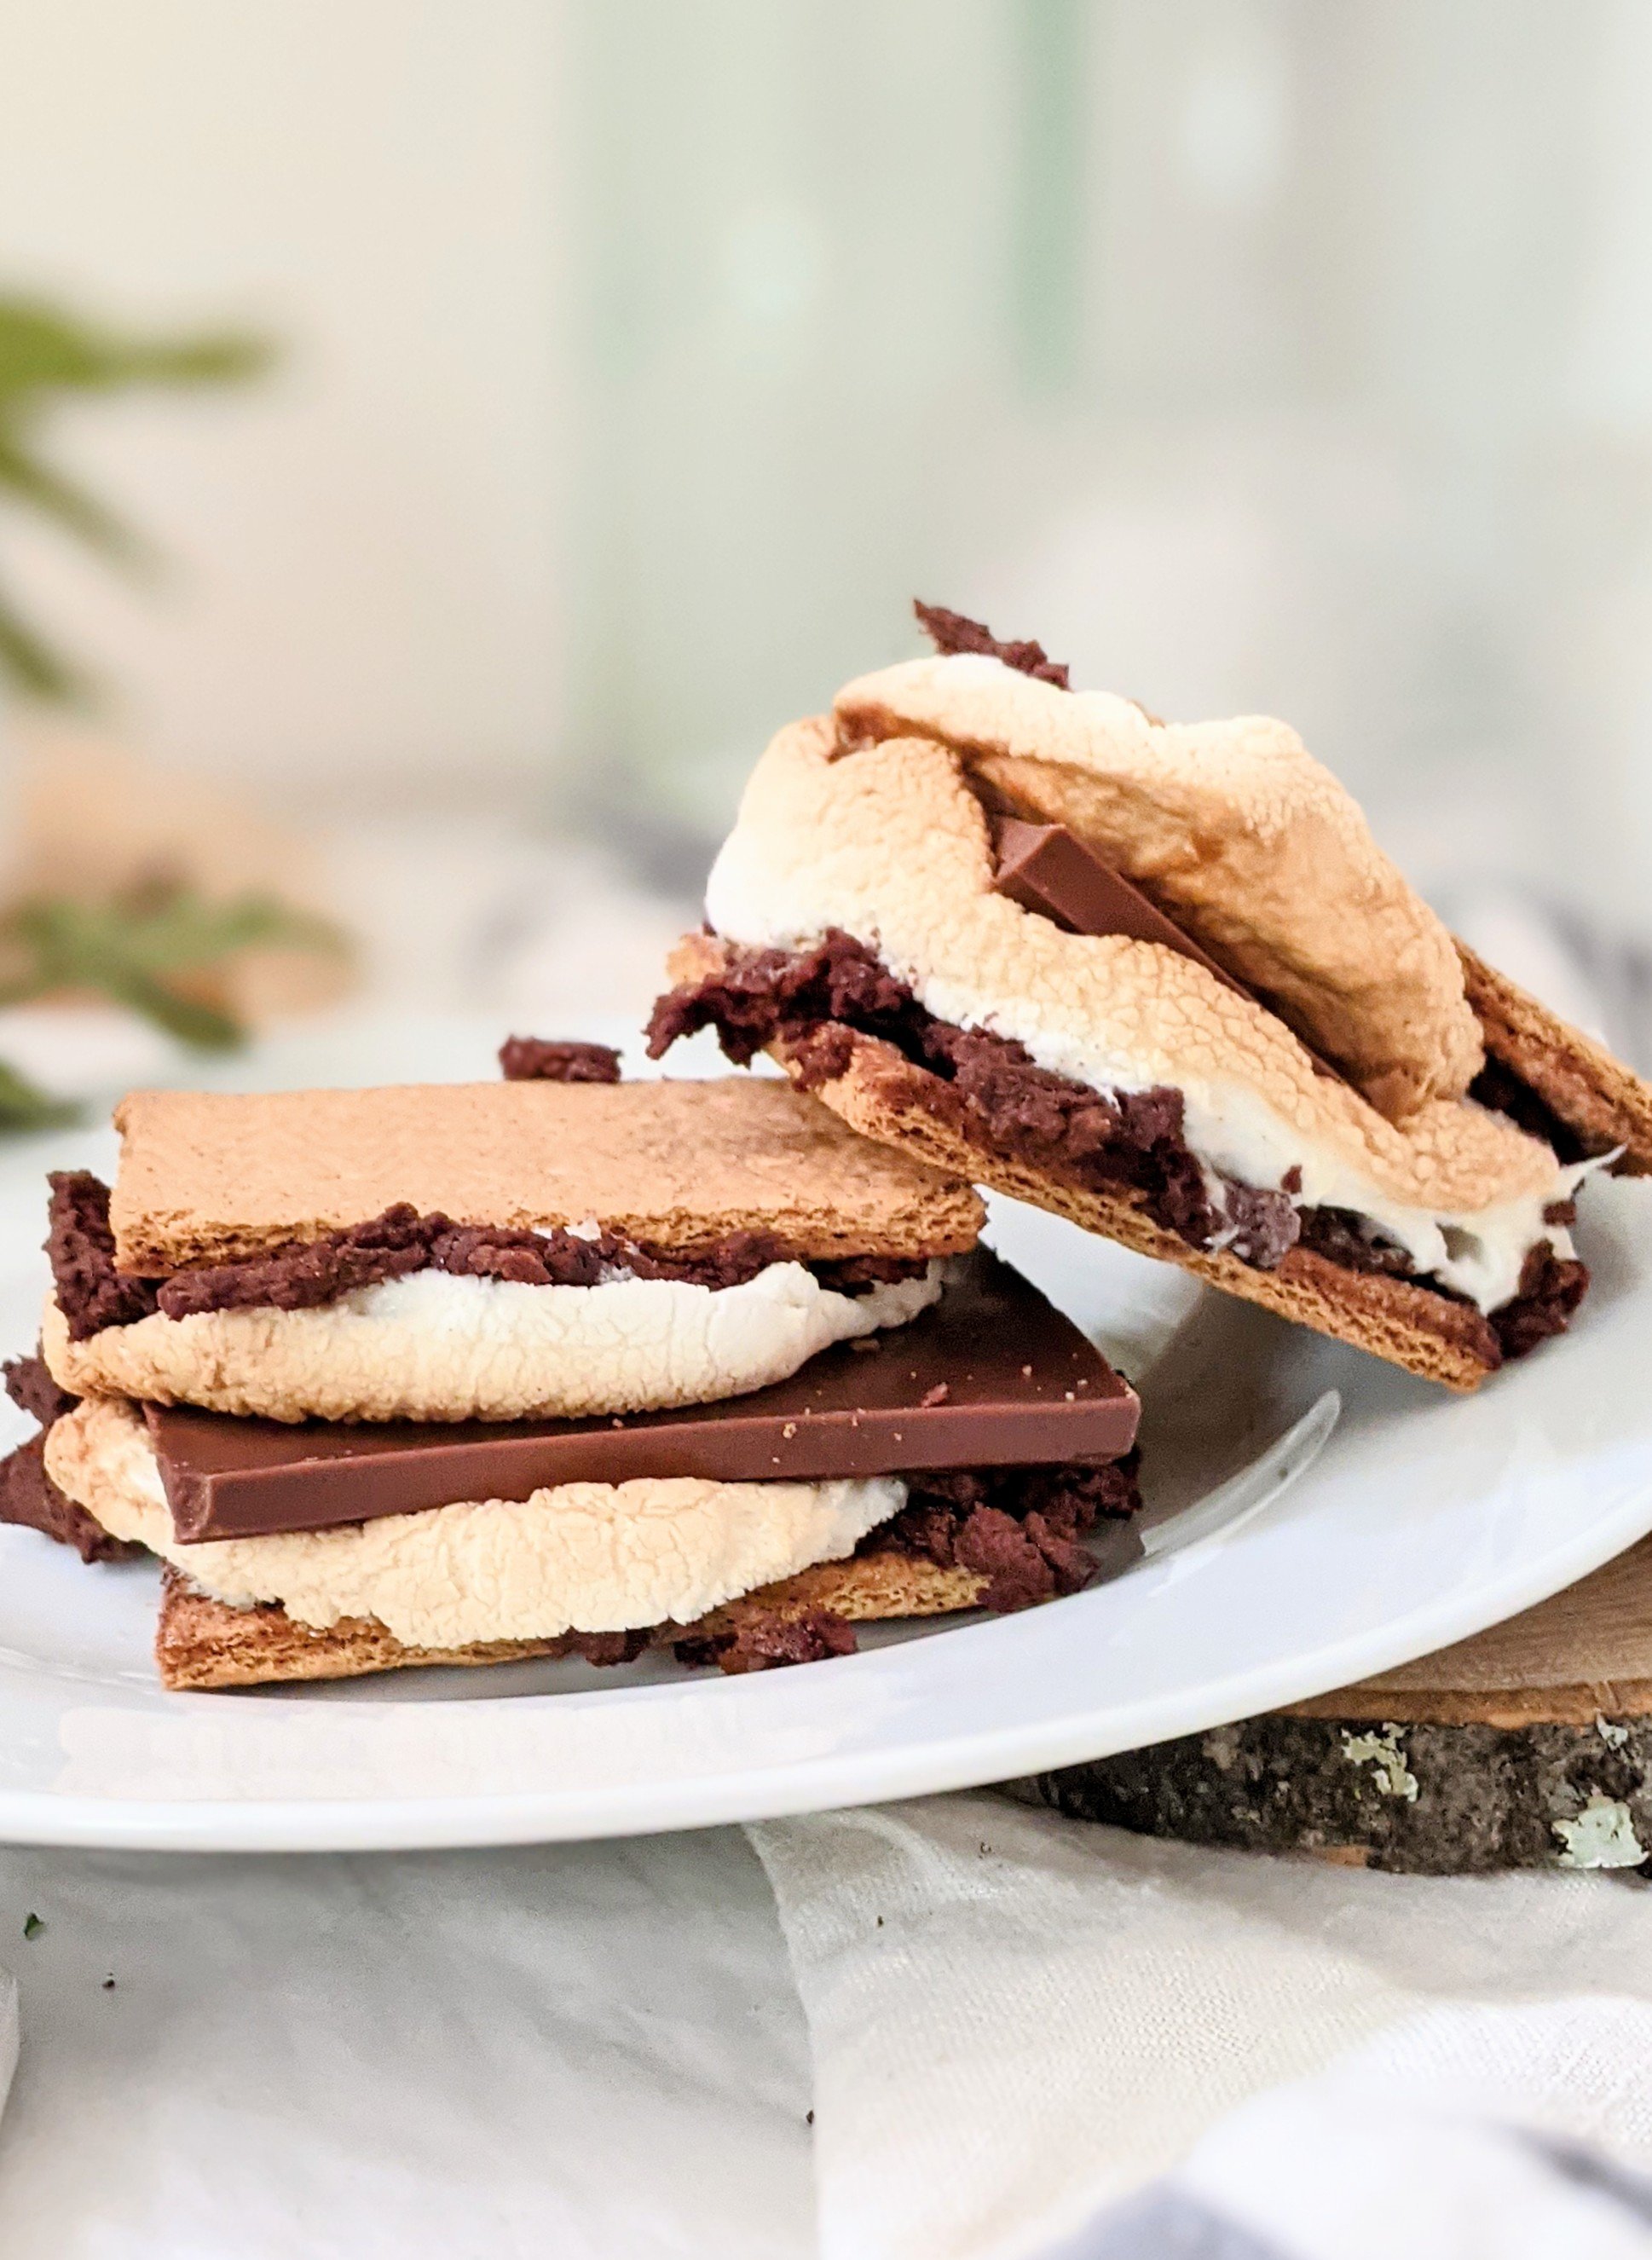 make your own smores bar toppings brownie s'mores recipe fun air fryer s'mores with brownies fun decadent chocolate s'mores with brownie batter vegan gluten free s'mores recipes